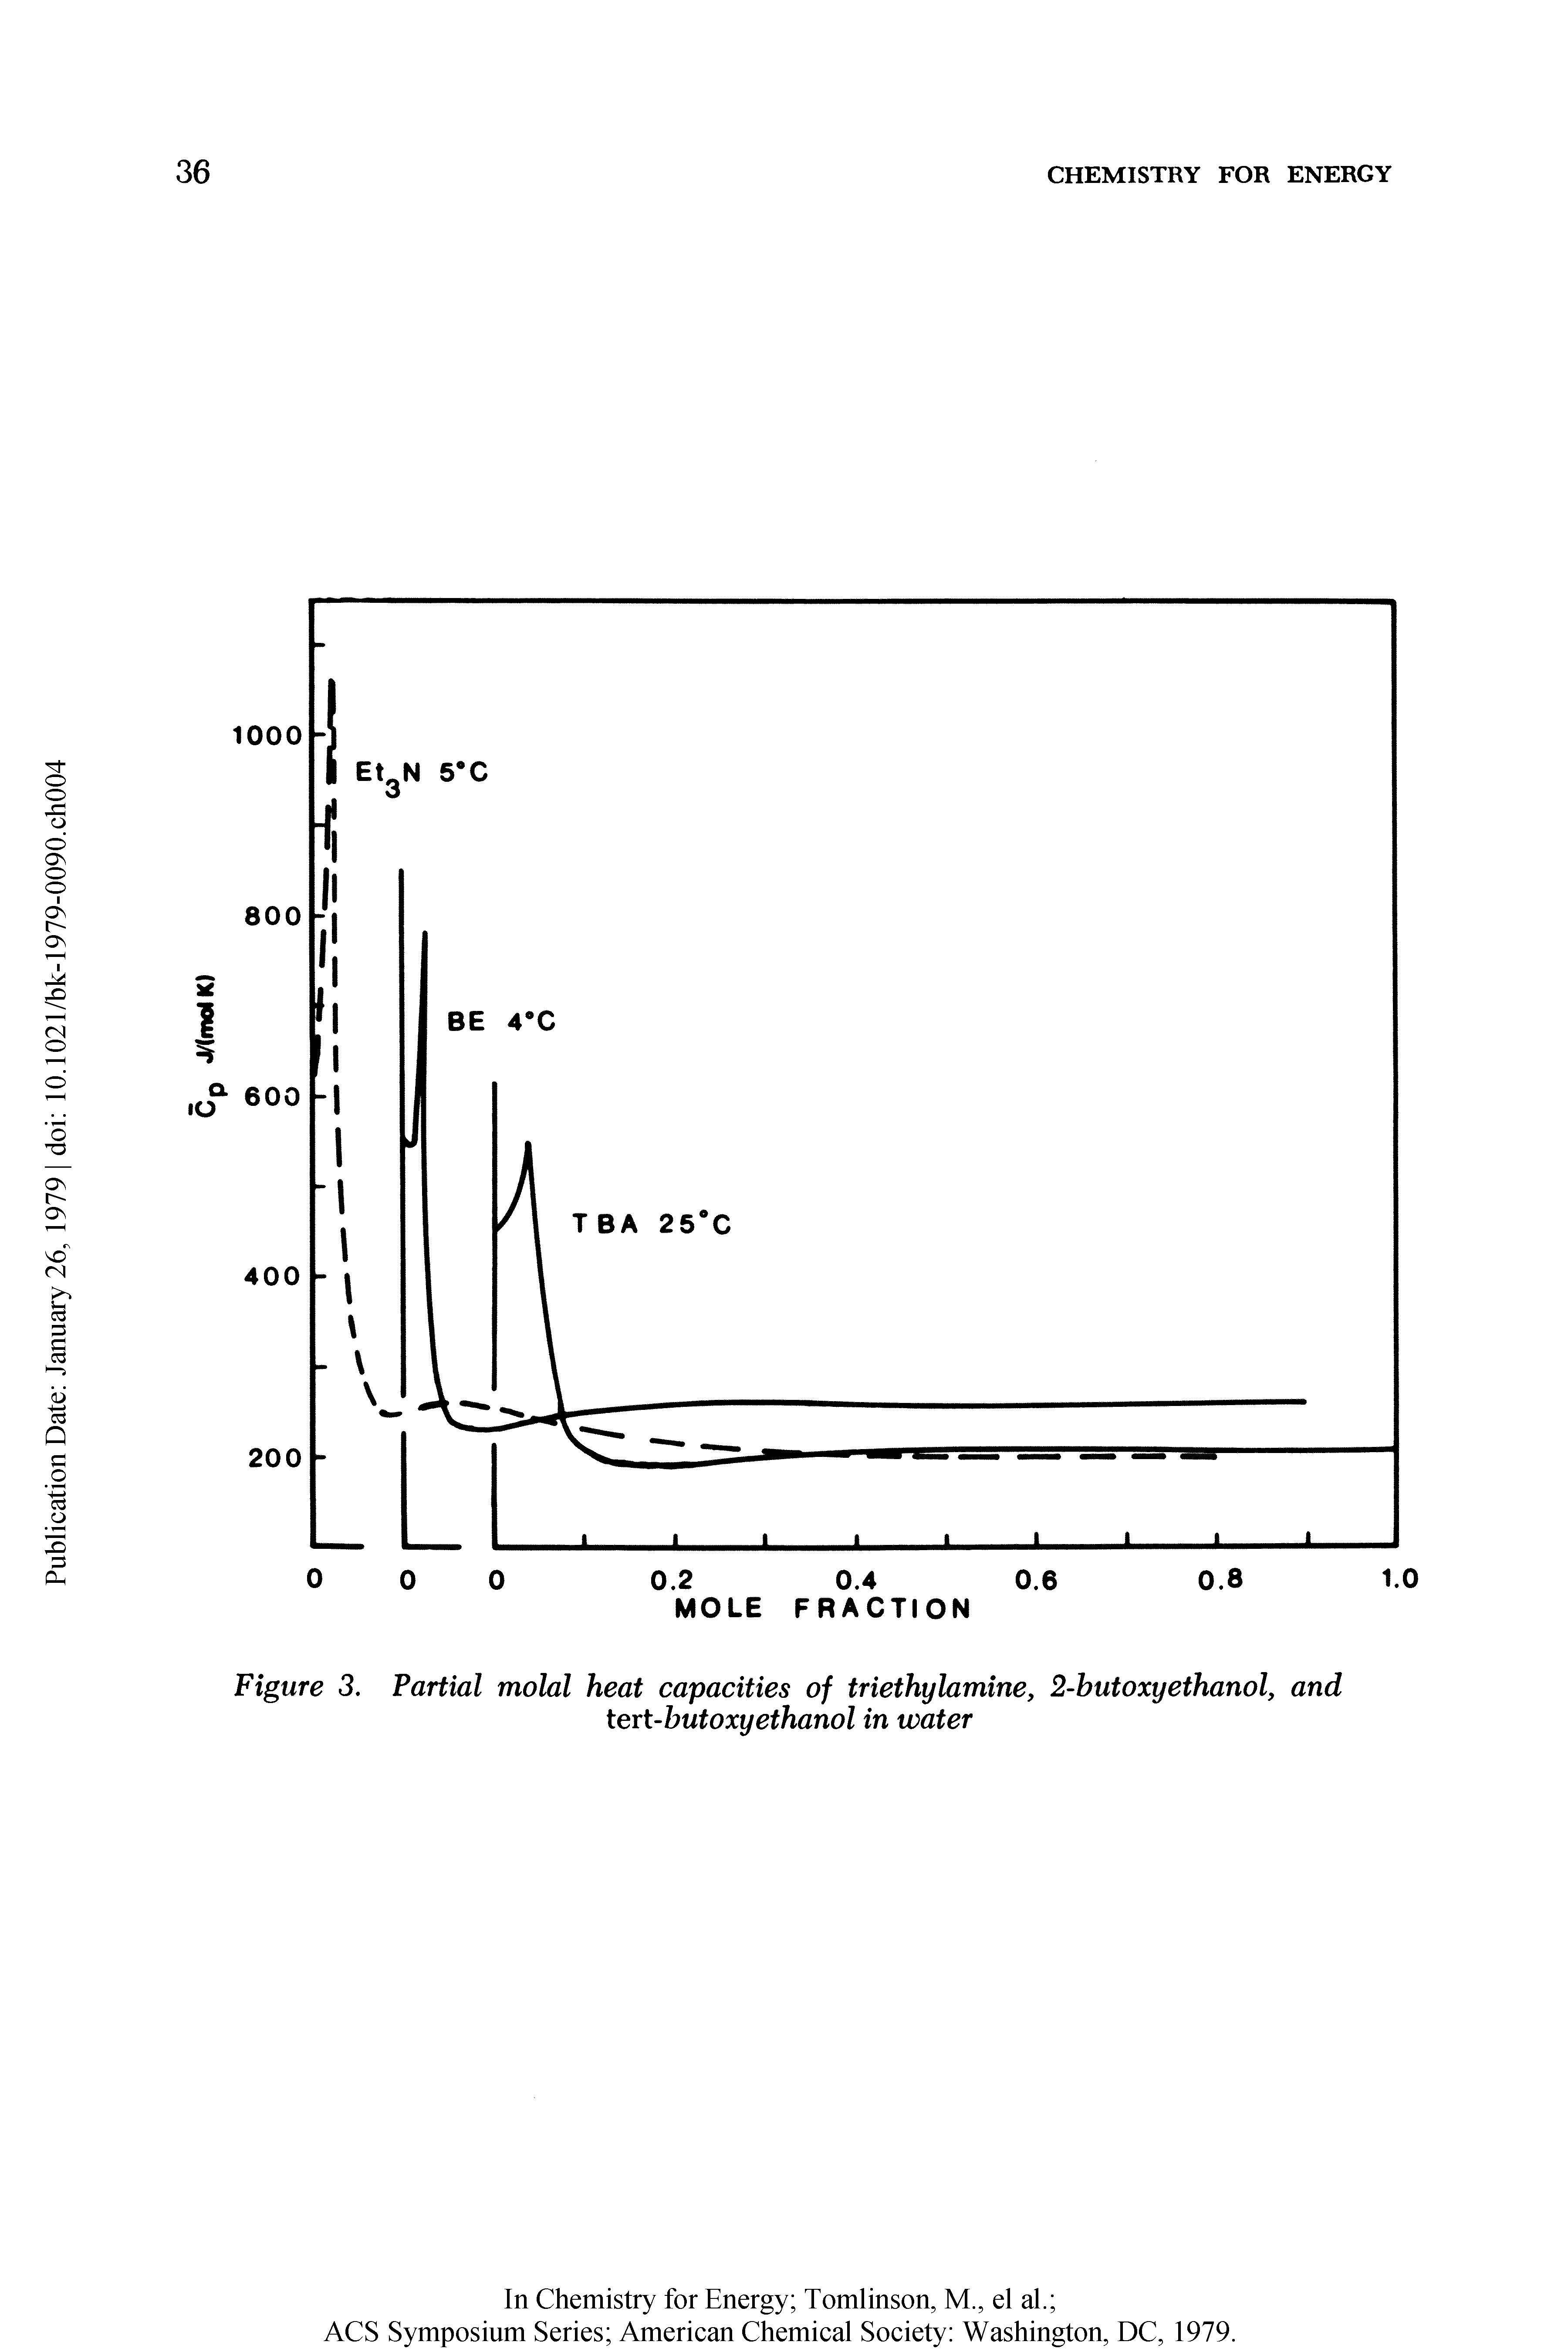 Figure 3. Partial molal heat capacities of triethylamine, 2-hutoxyethanol, and tert-butoxyethanol in water...